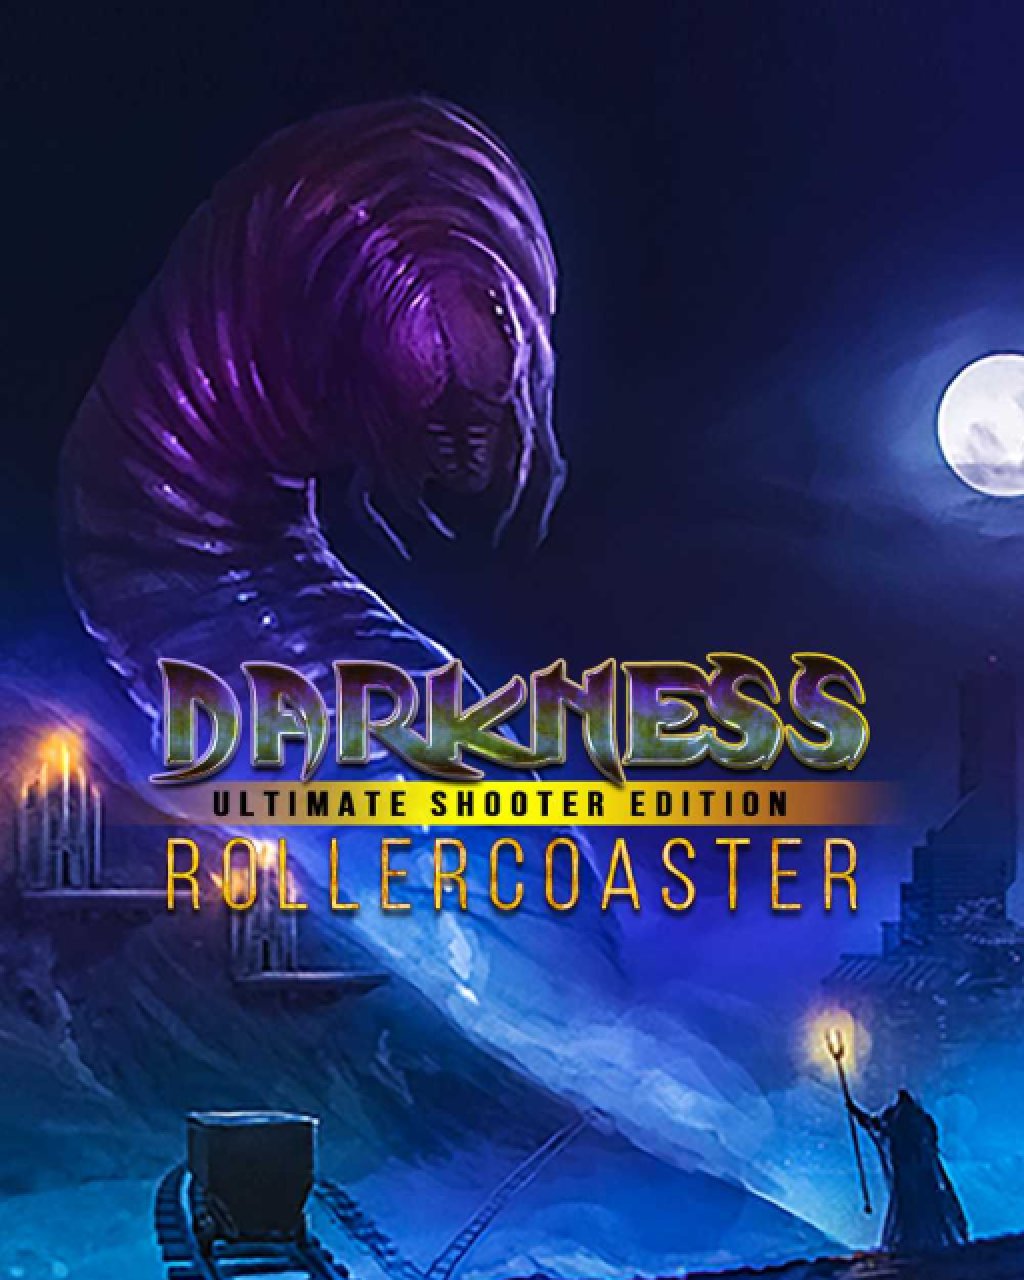 Darkness Rollercoaster Ultimate Shooter Edition